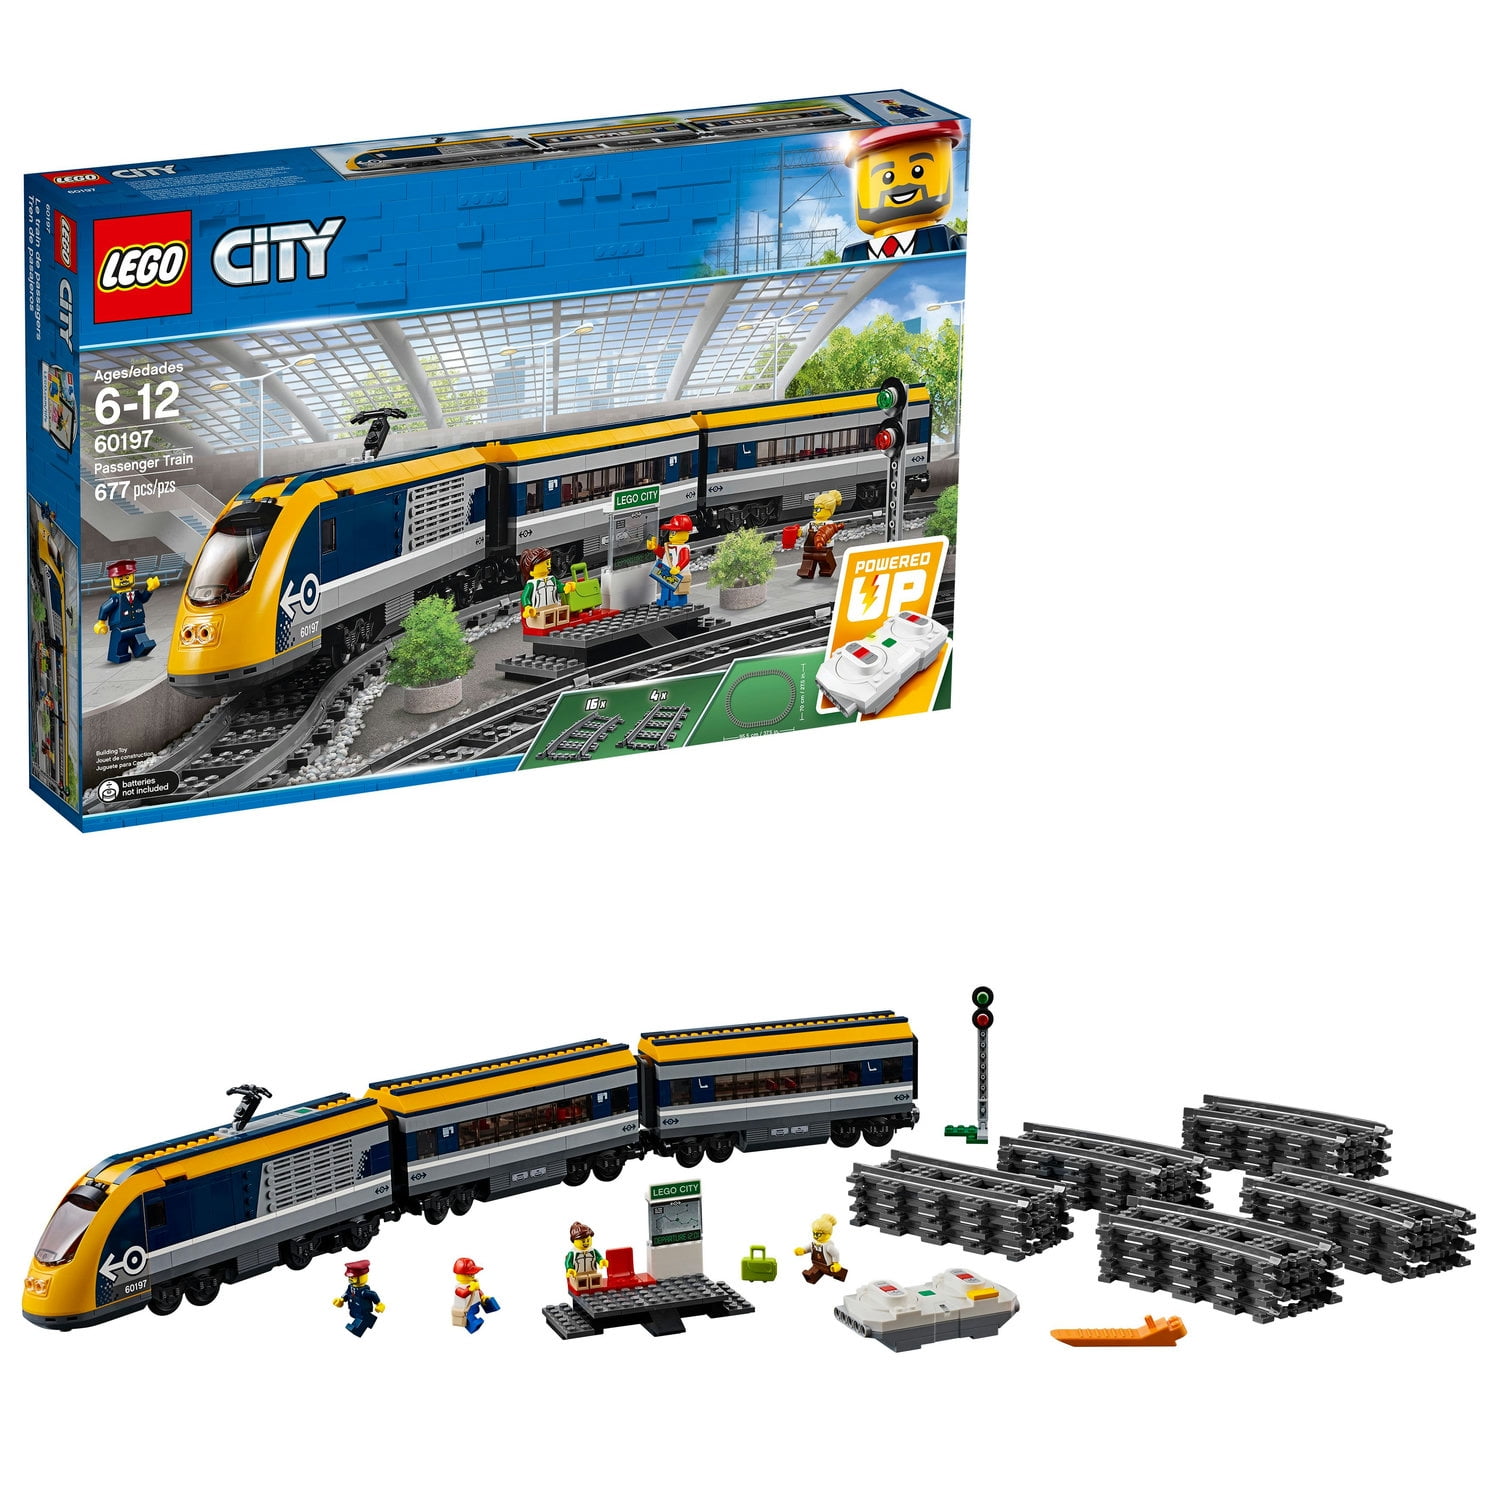 Lego Genuine City Passenger Train Buffet Dining Food Carriage from 60197 NEW 